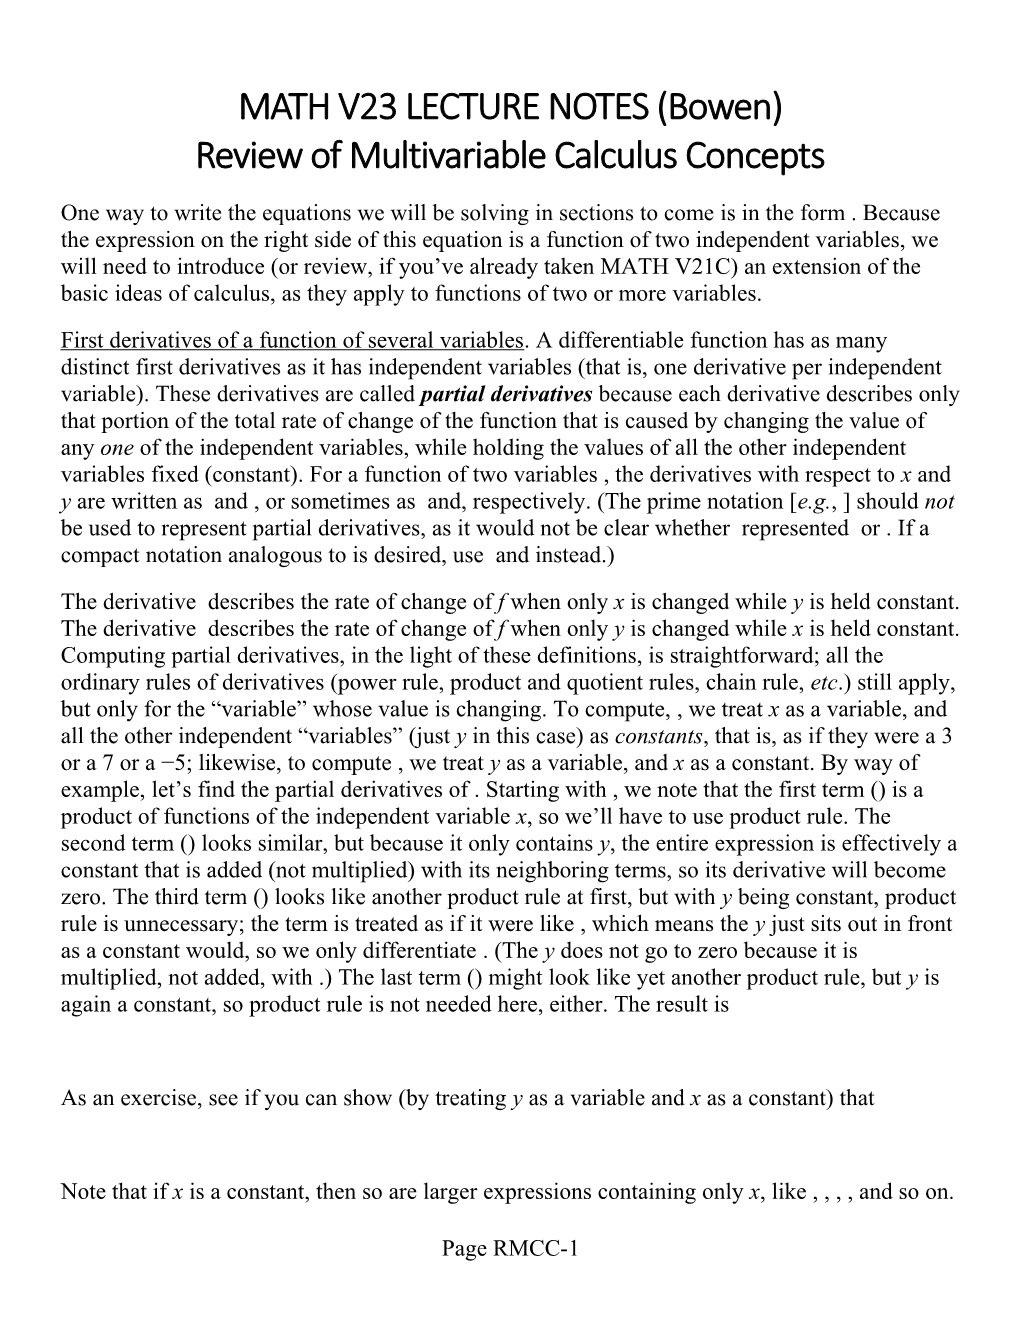 MATH V23 LECTURE NOTES (Bowen) Review of Multivariable Calculus Concepts